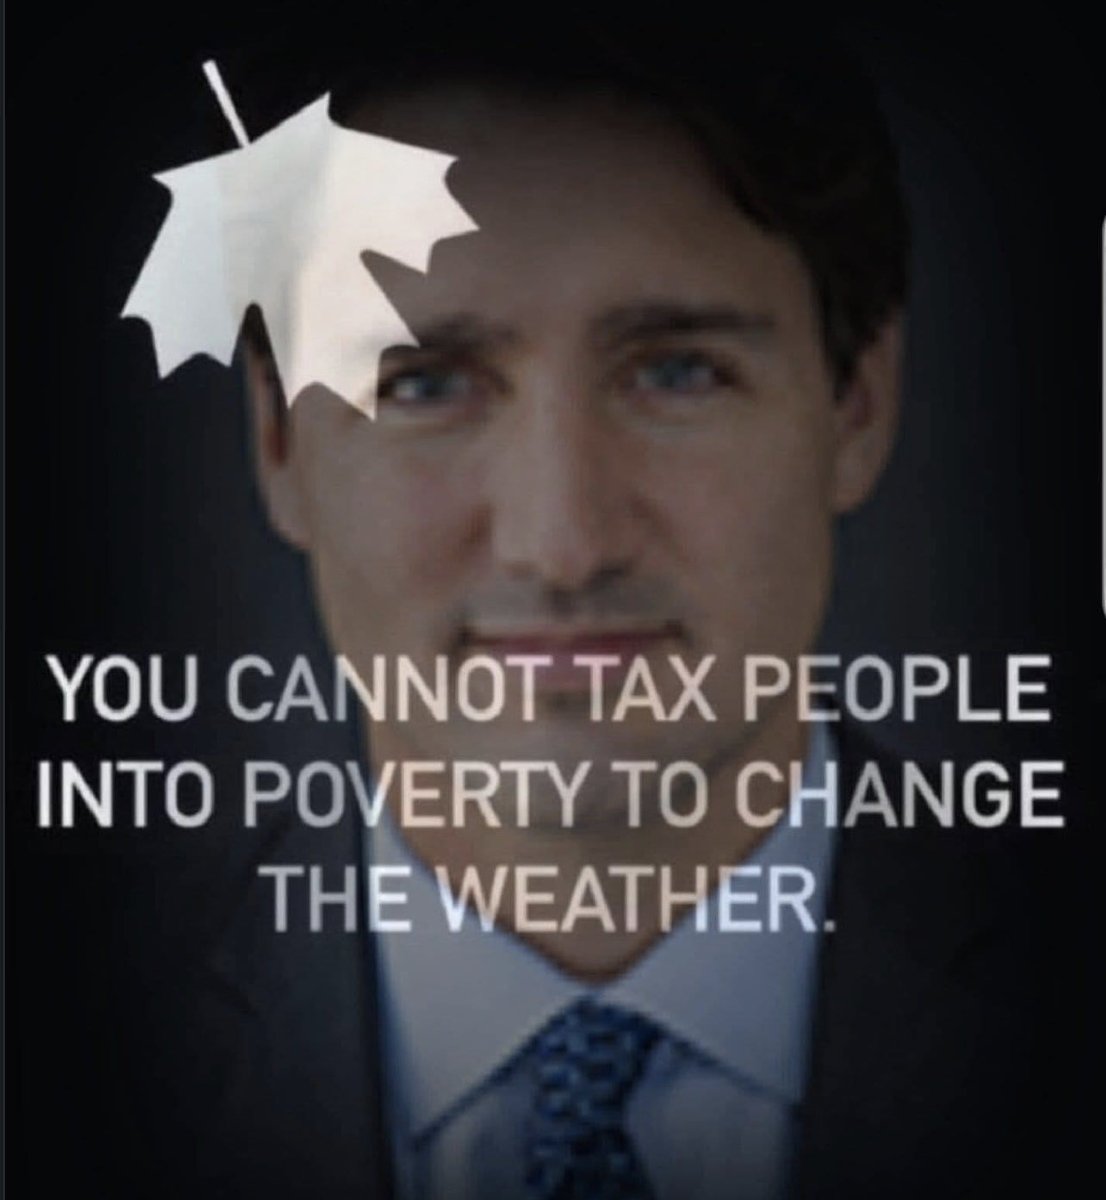 Today is June 12th, and Justin Trudeau is the WORST Prime Minister in Canadian history.
#TrudeauMustGo
#TrudeauMustResign
#TrudeauBurningCanada